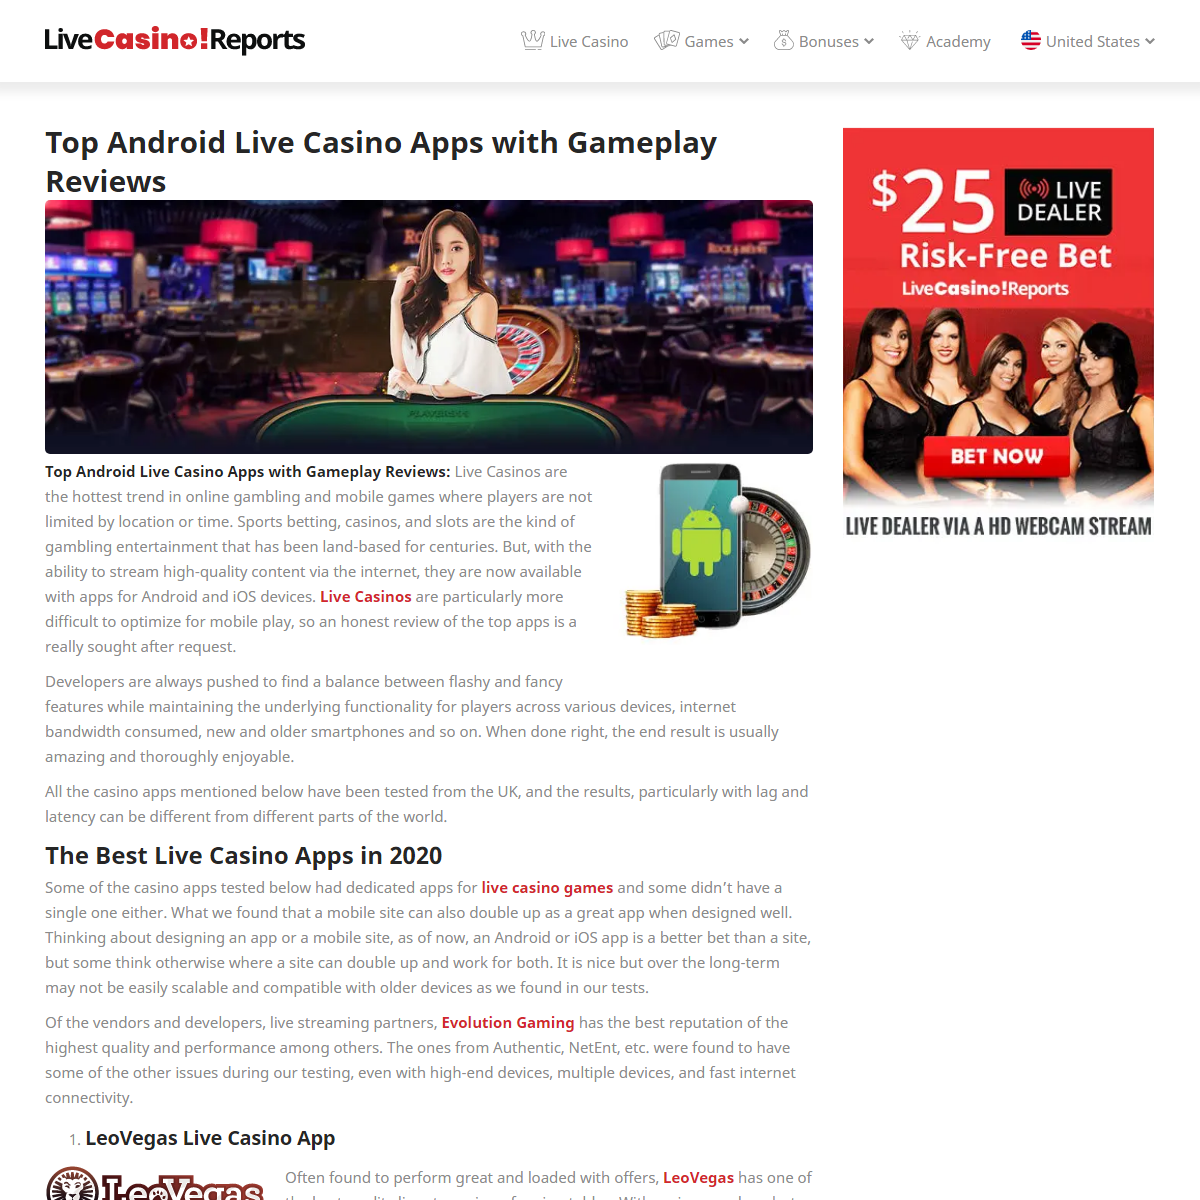 A complete backup of https://www.livecasinoreports.com/android-live-casino-apps